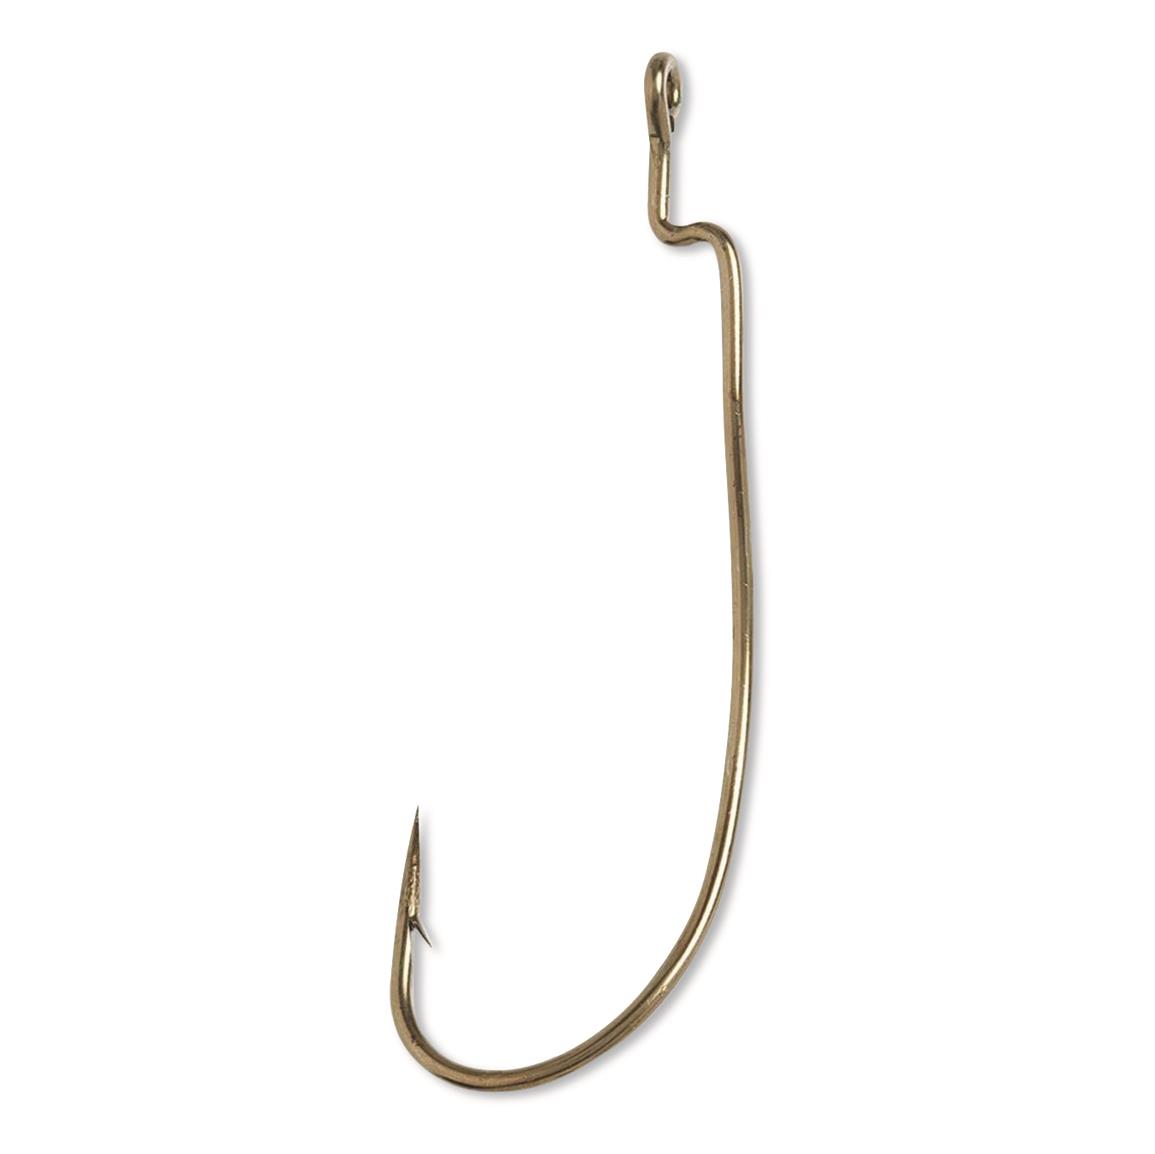 Eagle Claw Lazer Value Series Rotating Worm Hooks, 15 Pack